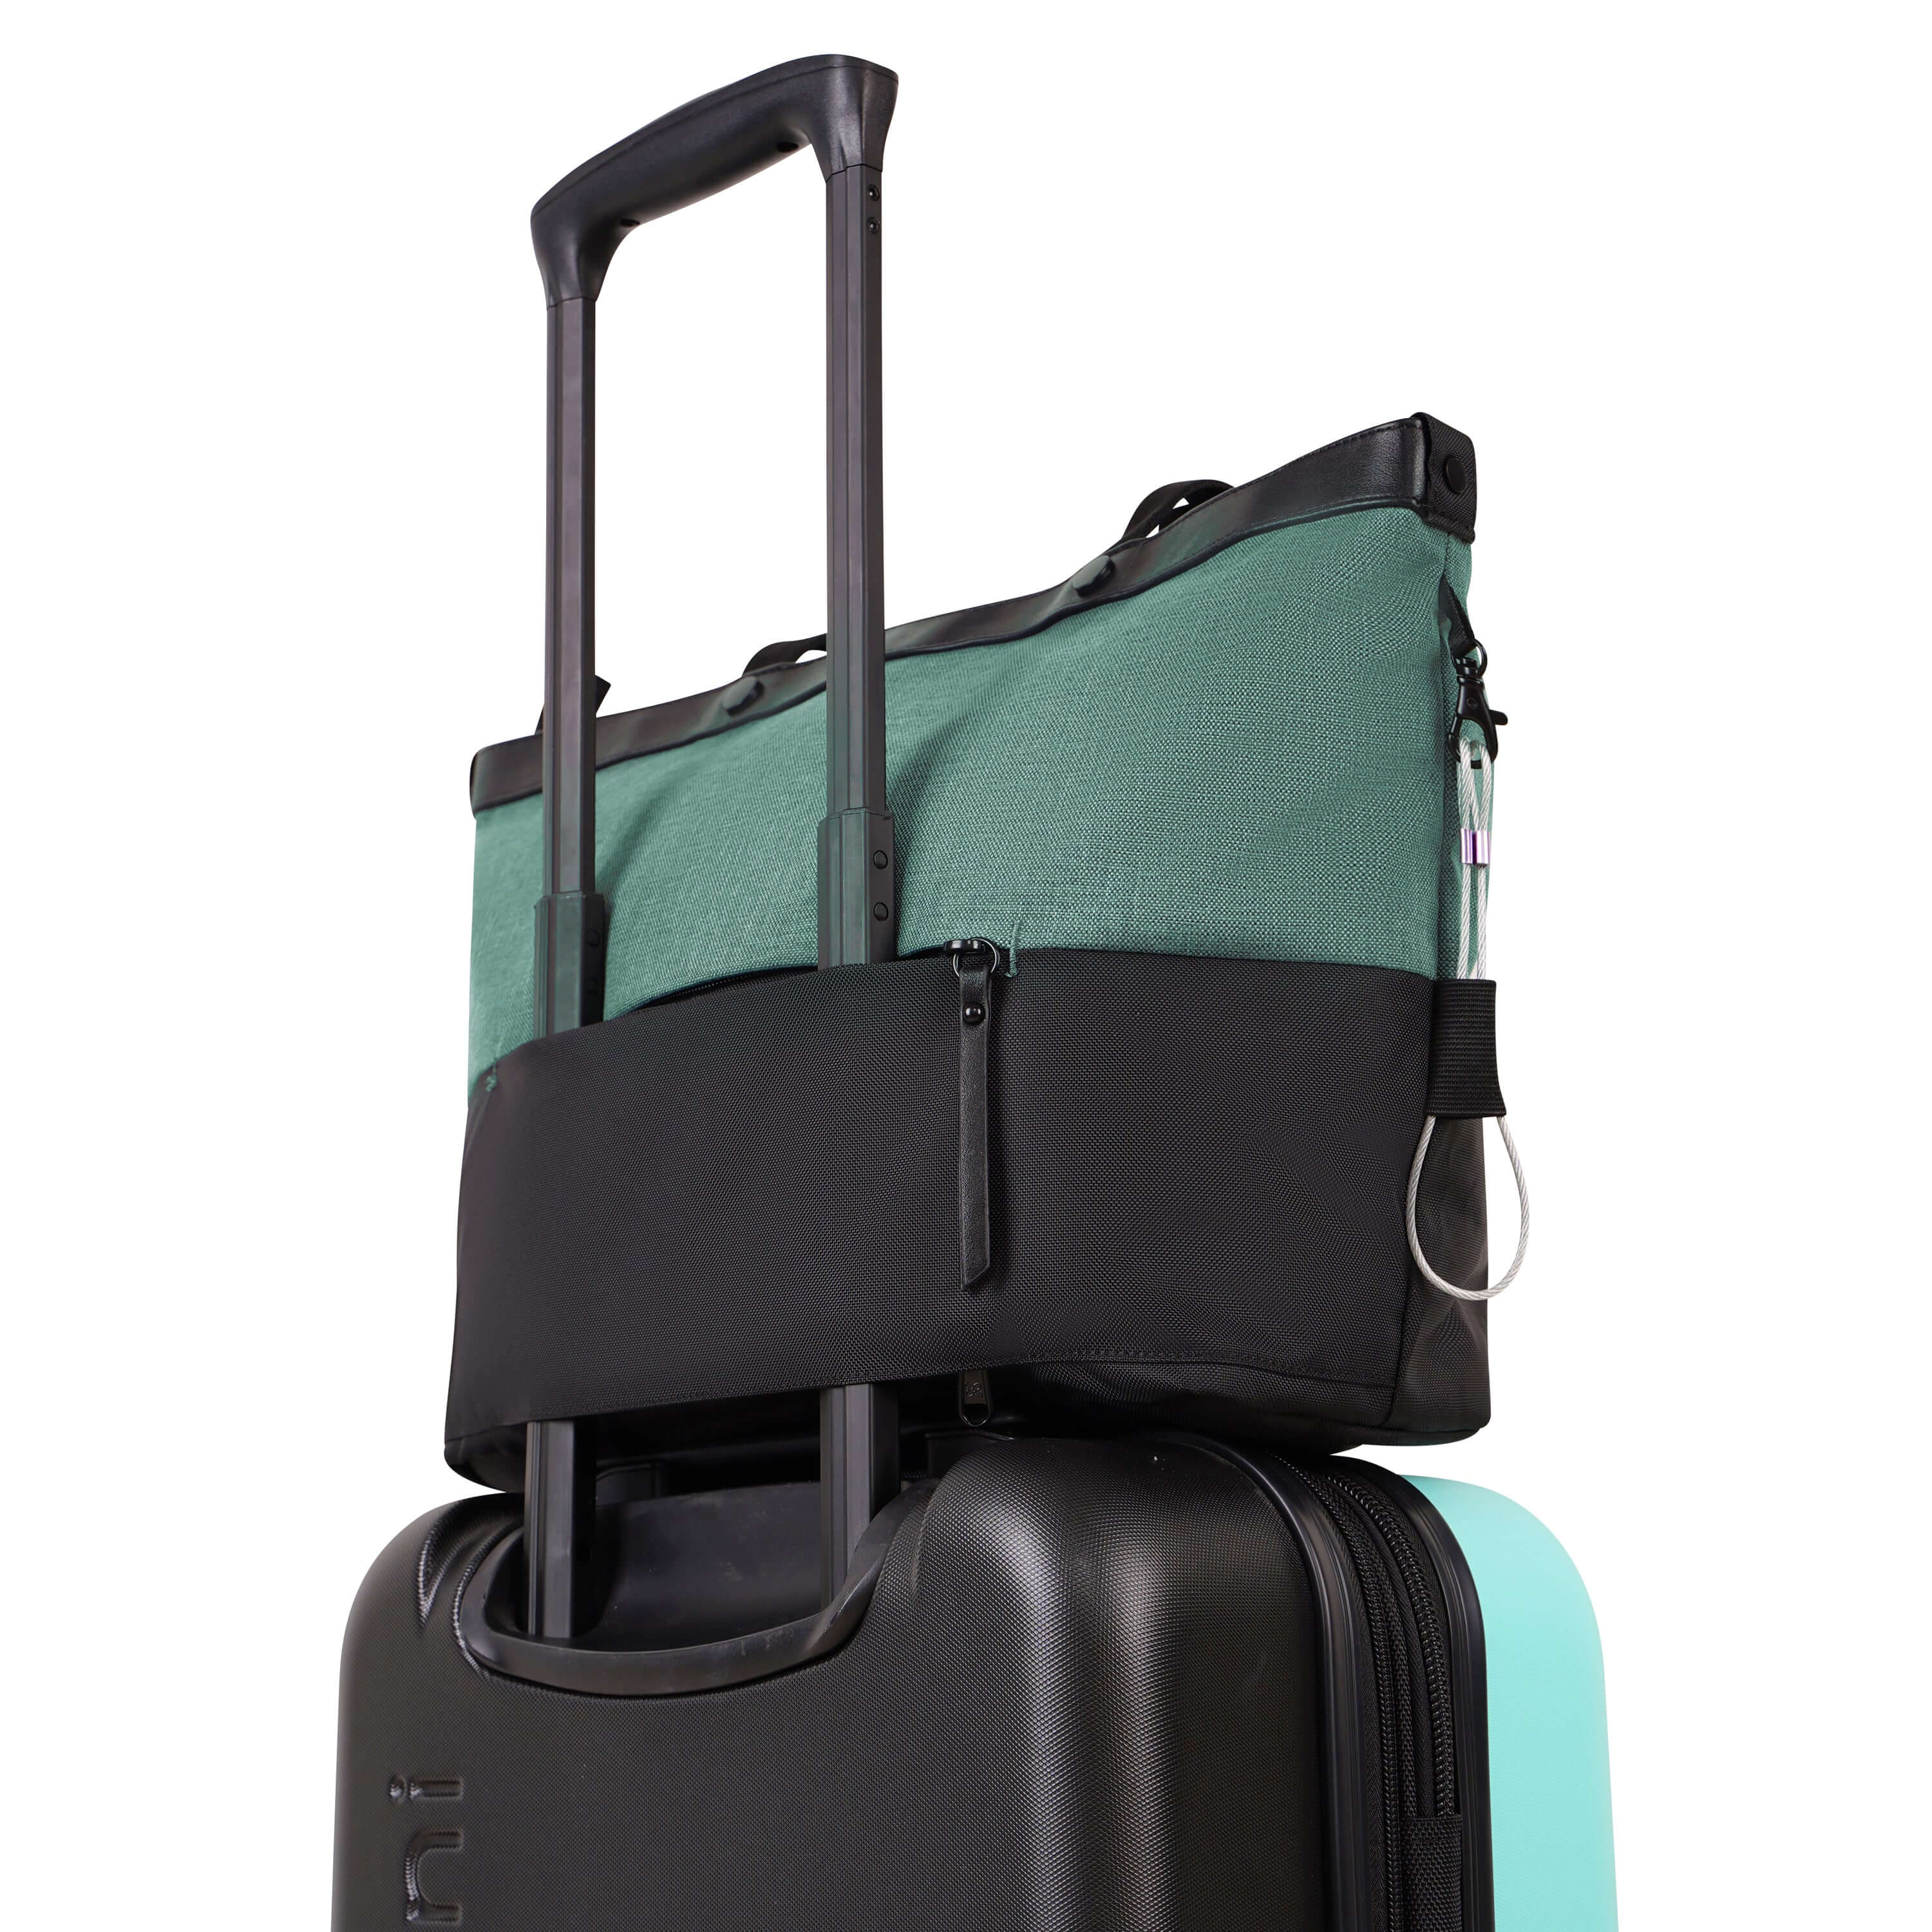 Back view of Sherpani&#39;s Anti-Theft bag the Cali AT in Teal. The exterior zipper pocket is unzipped at both ends creating the luggage pass-through. The bag sits on top of Sherpani&#39;s luggage the Meridian in Caribe, the handle of the suitcase running through the pass-through, securing the Cali AT to the Meridian for easy travel.